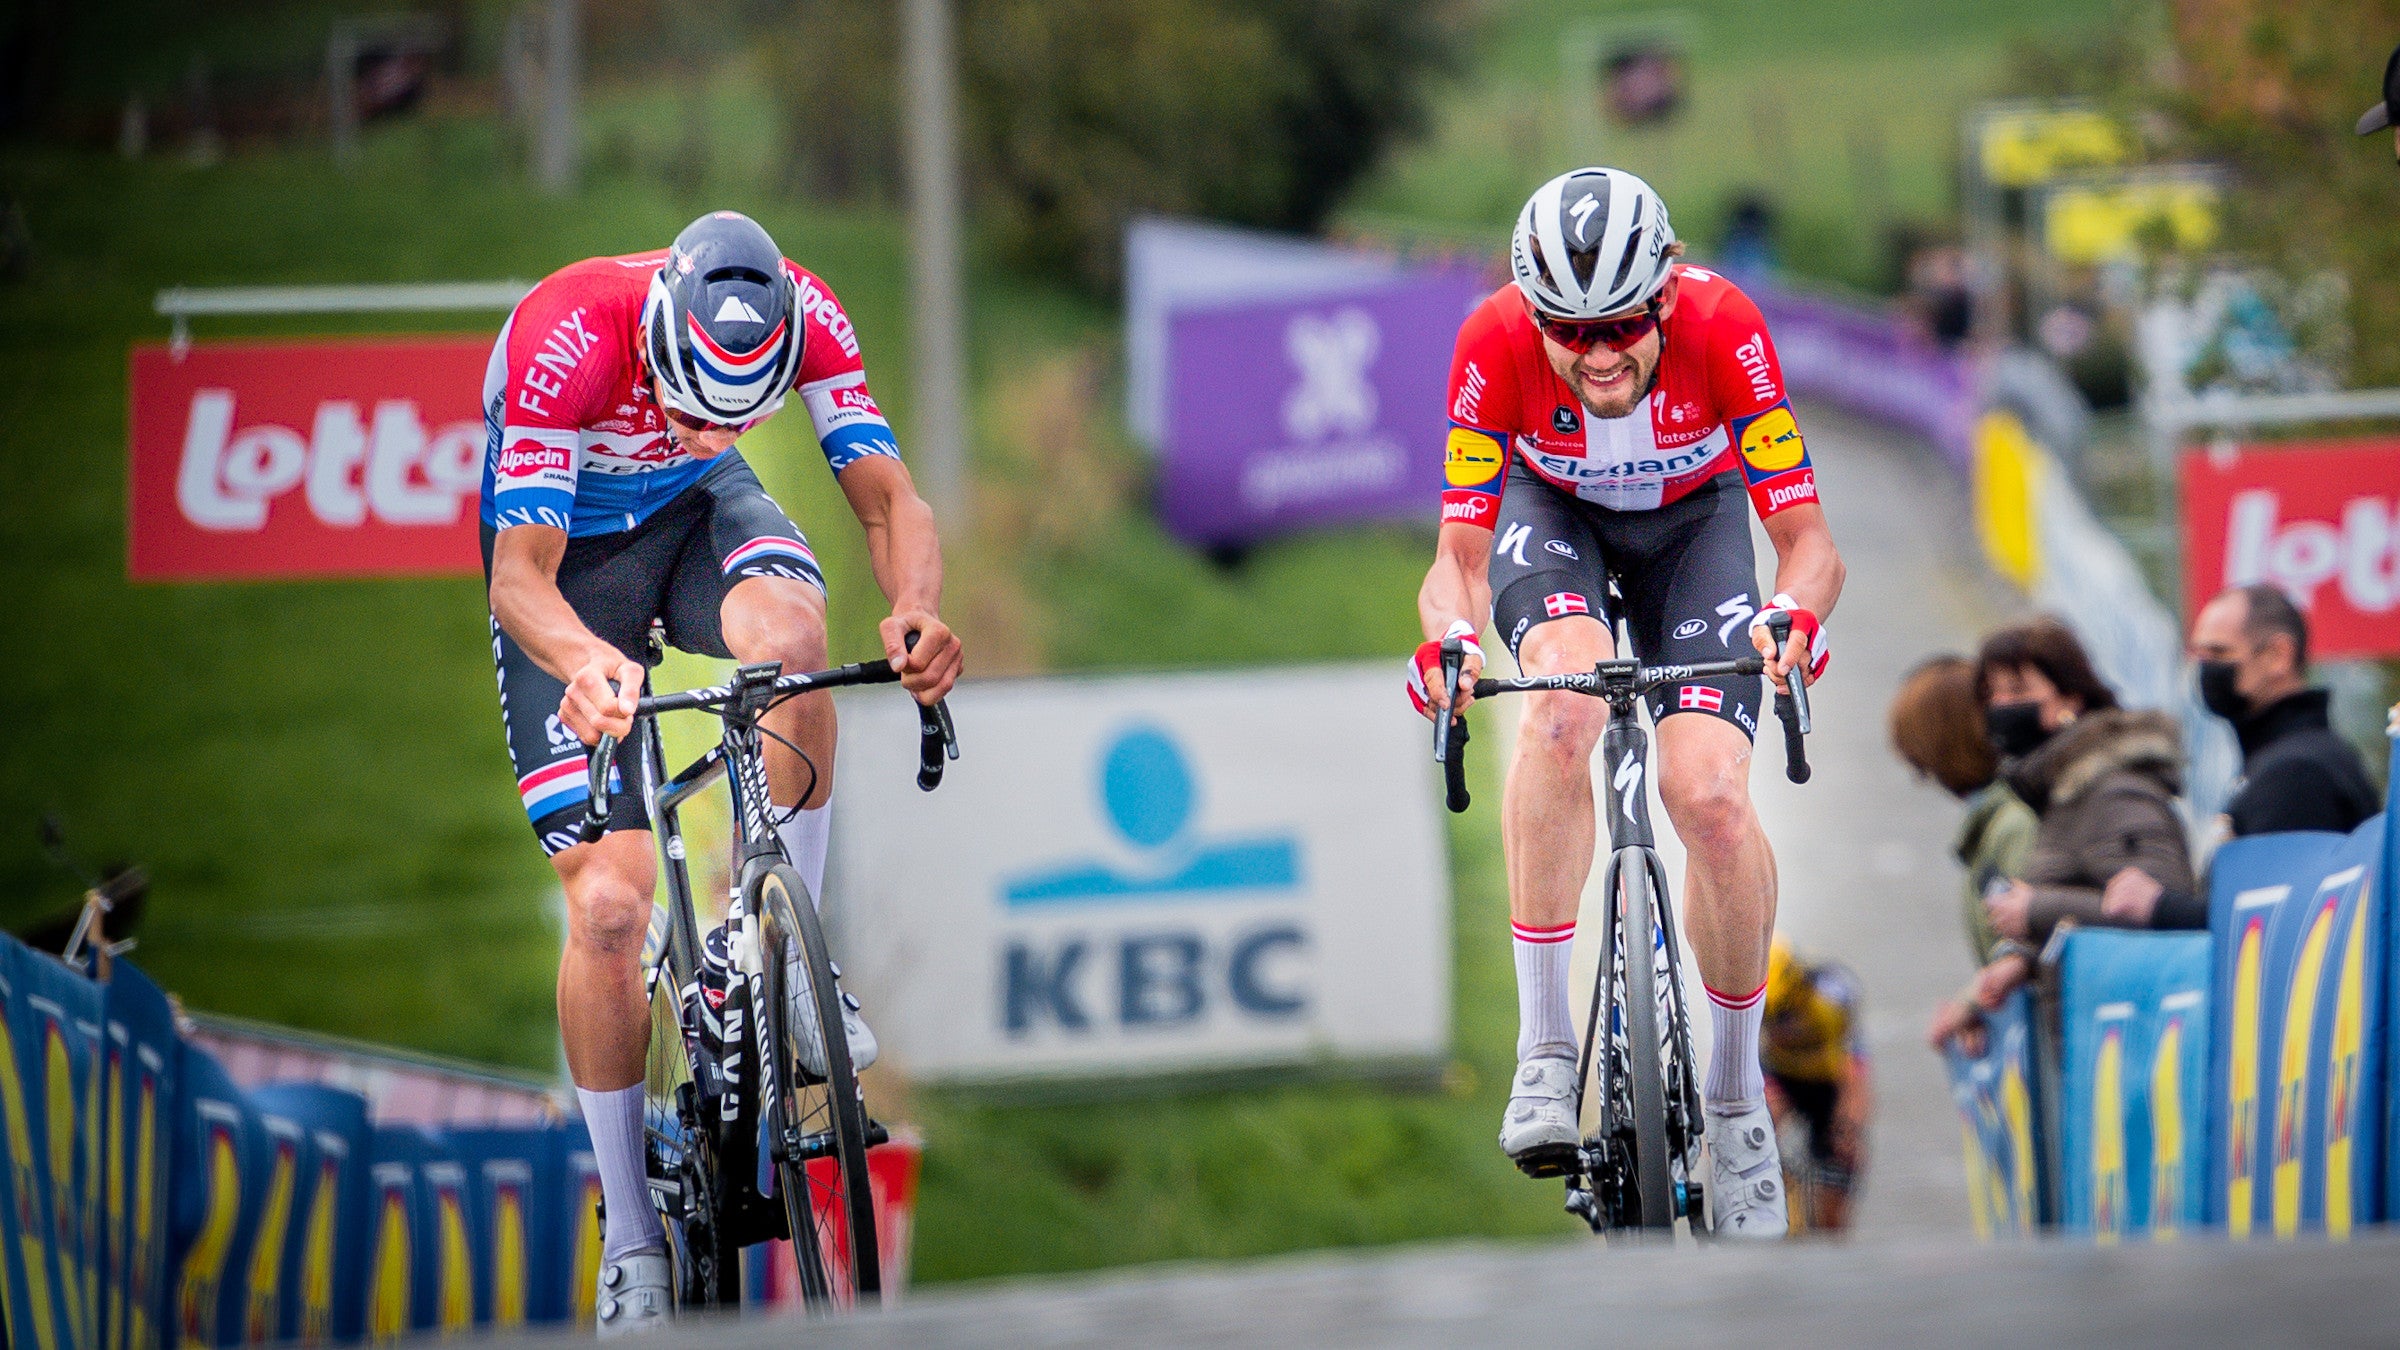 How to watch Tour of Flanders 2022 Live streaming and TV